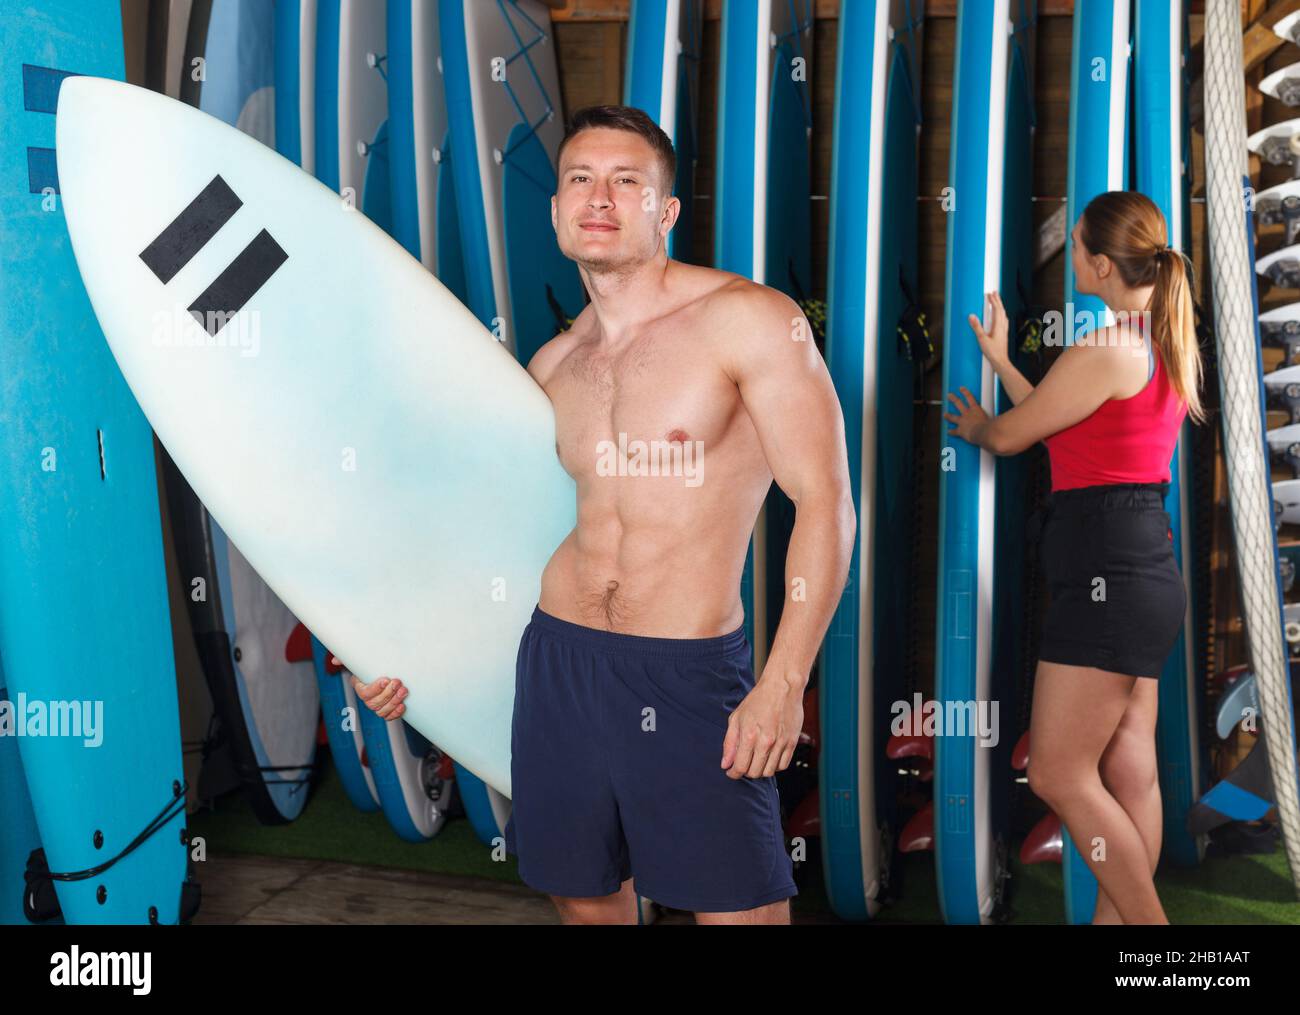 guy is standing with surfboard Stock Photo